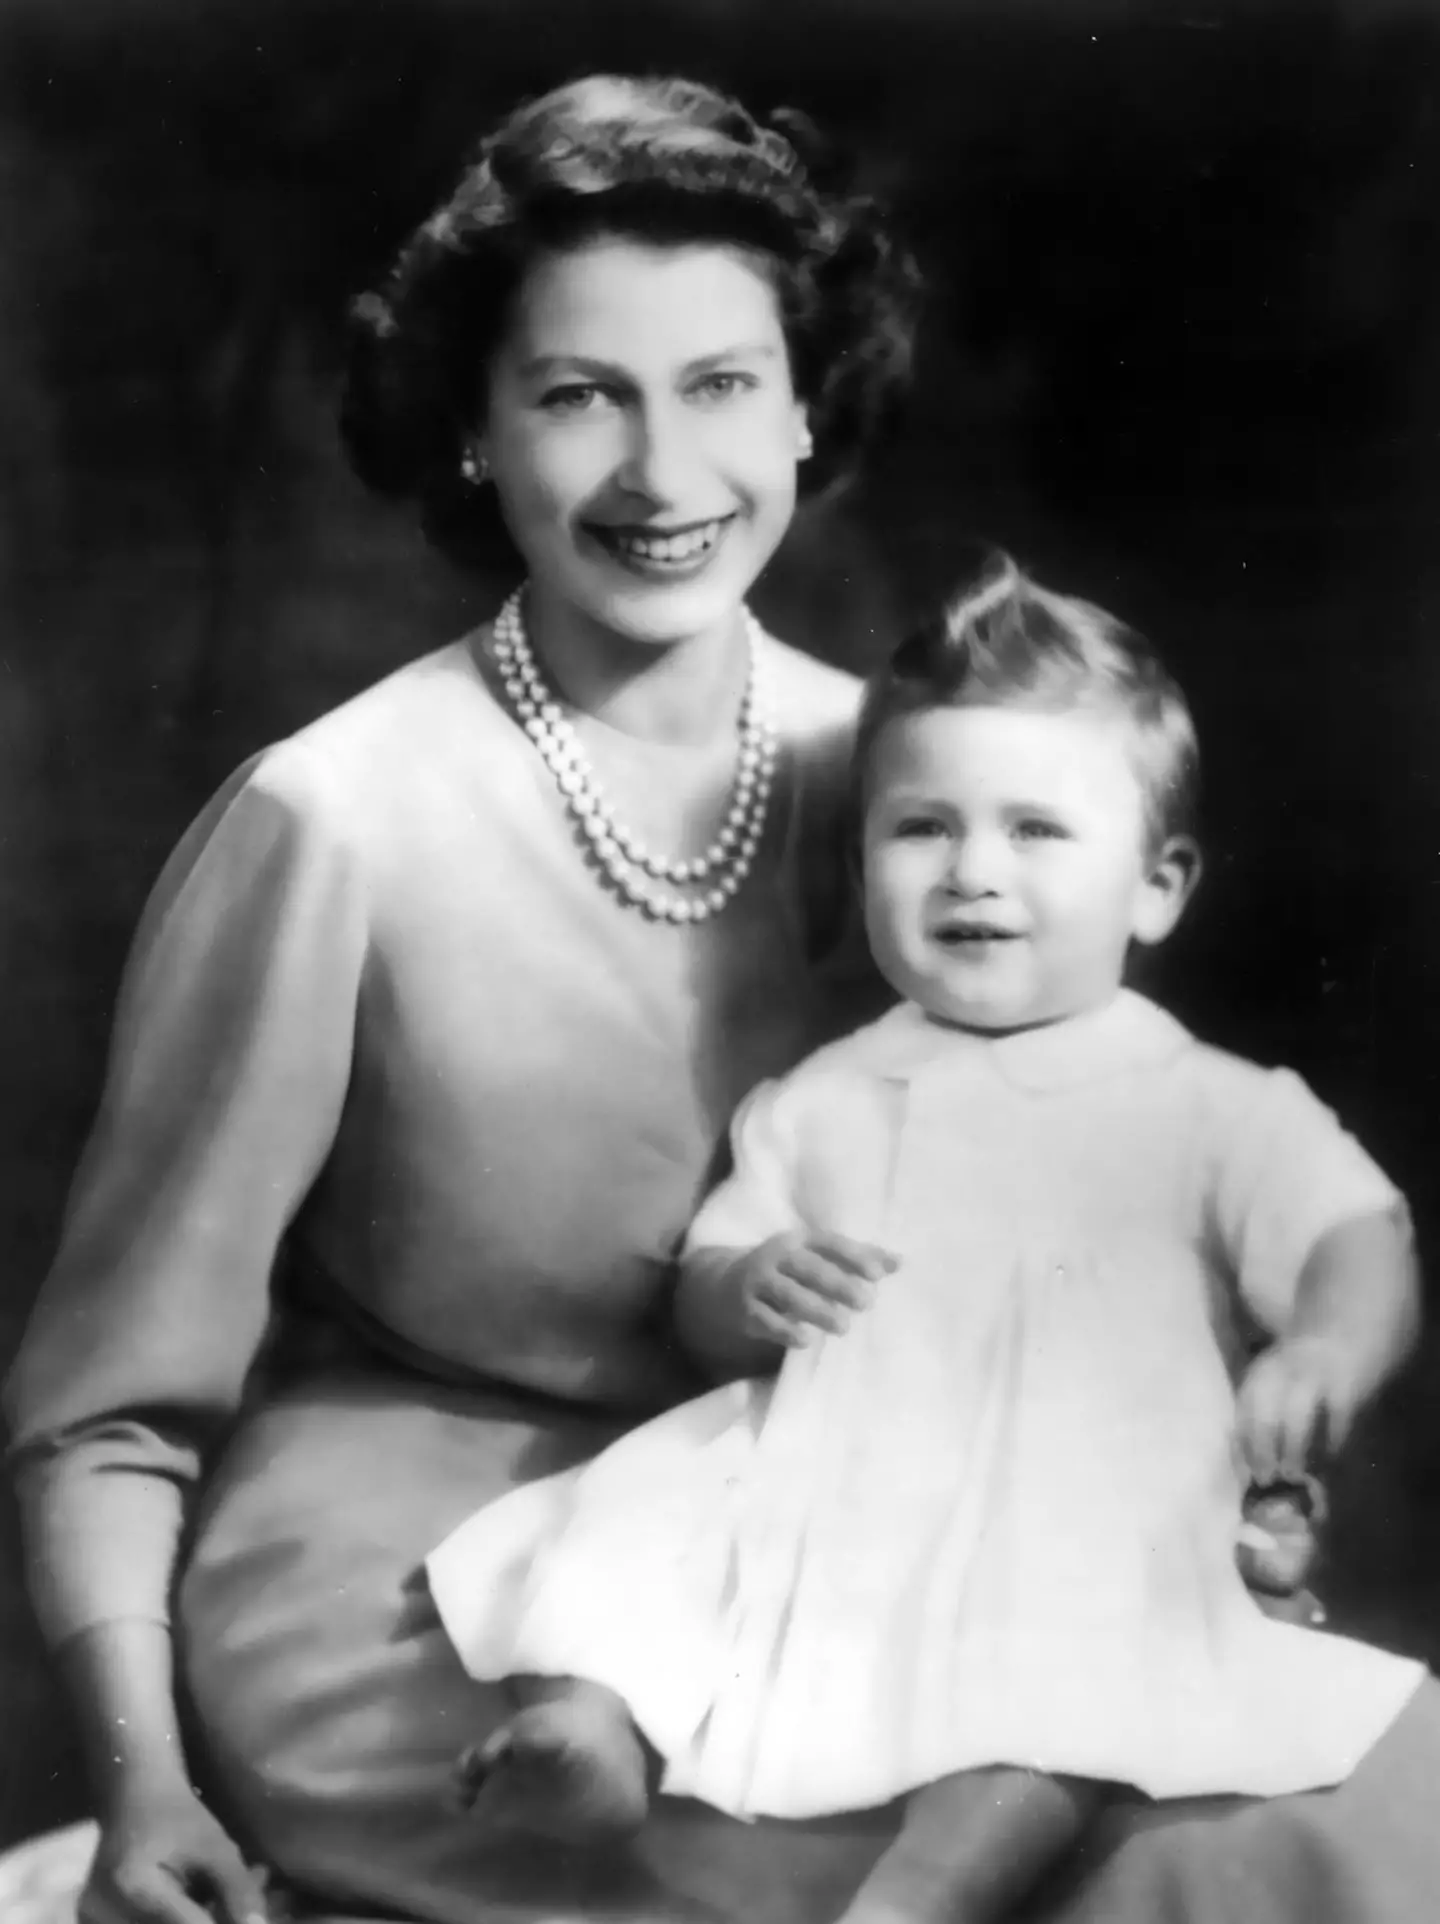 There are later photos of Queen Elizabeth II with baby Charles.